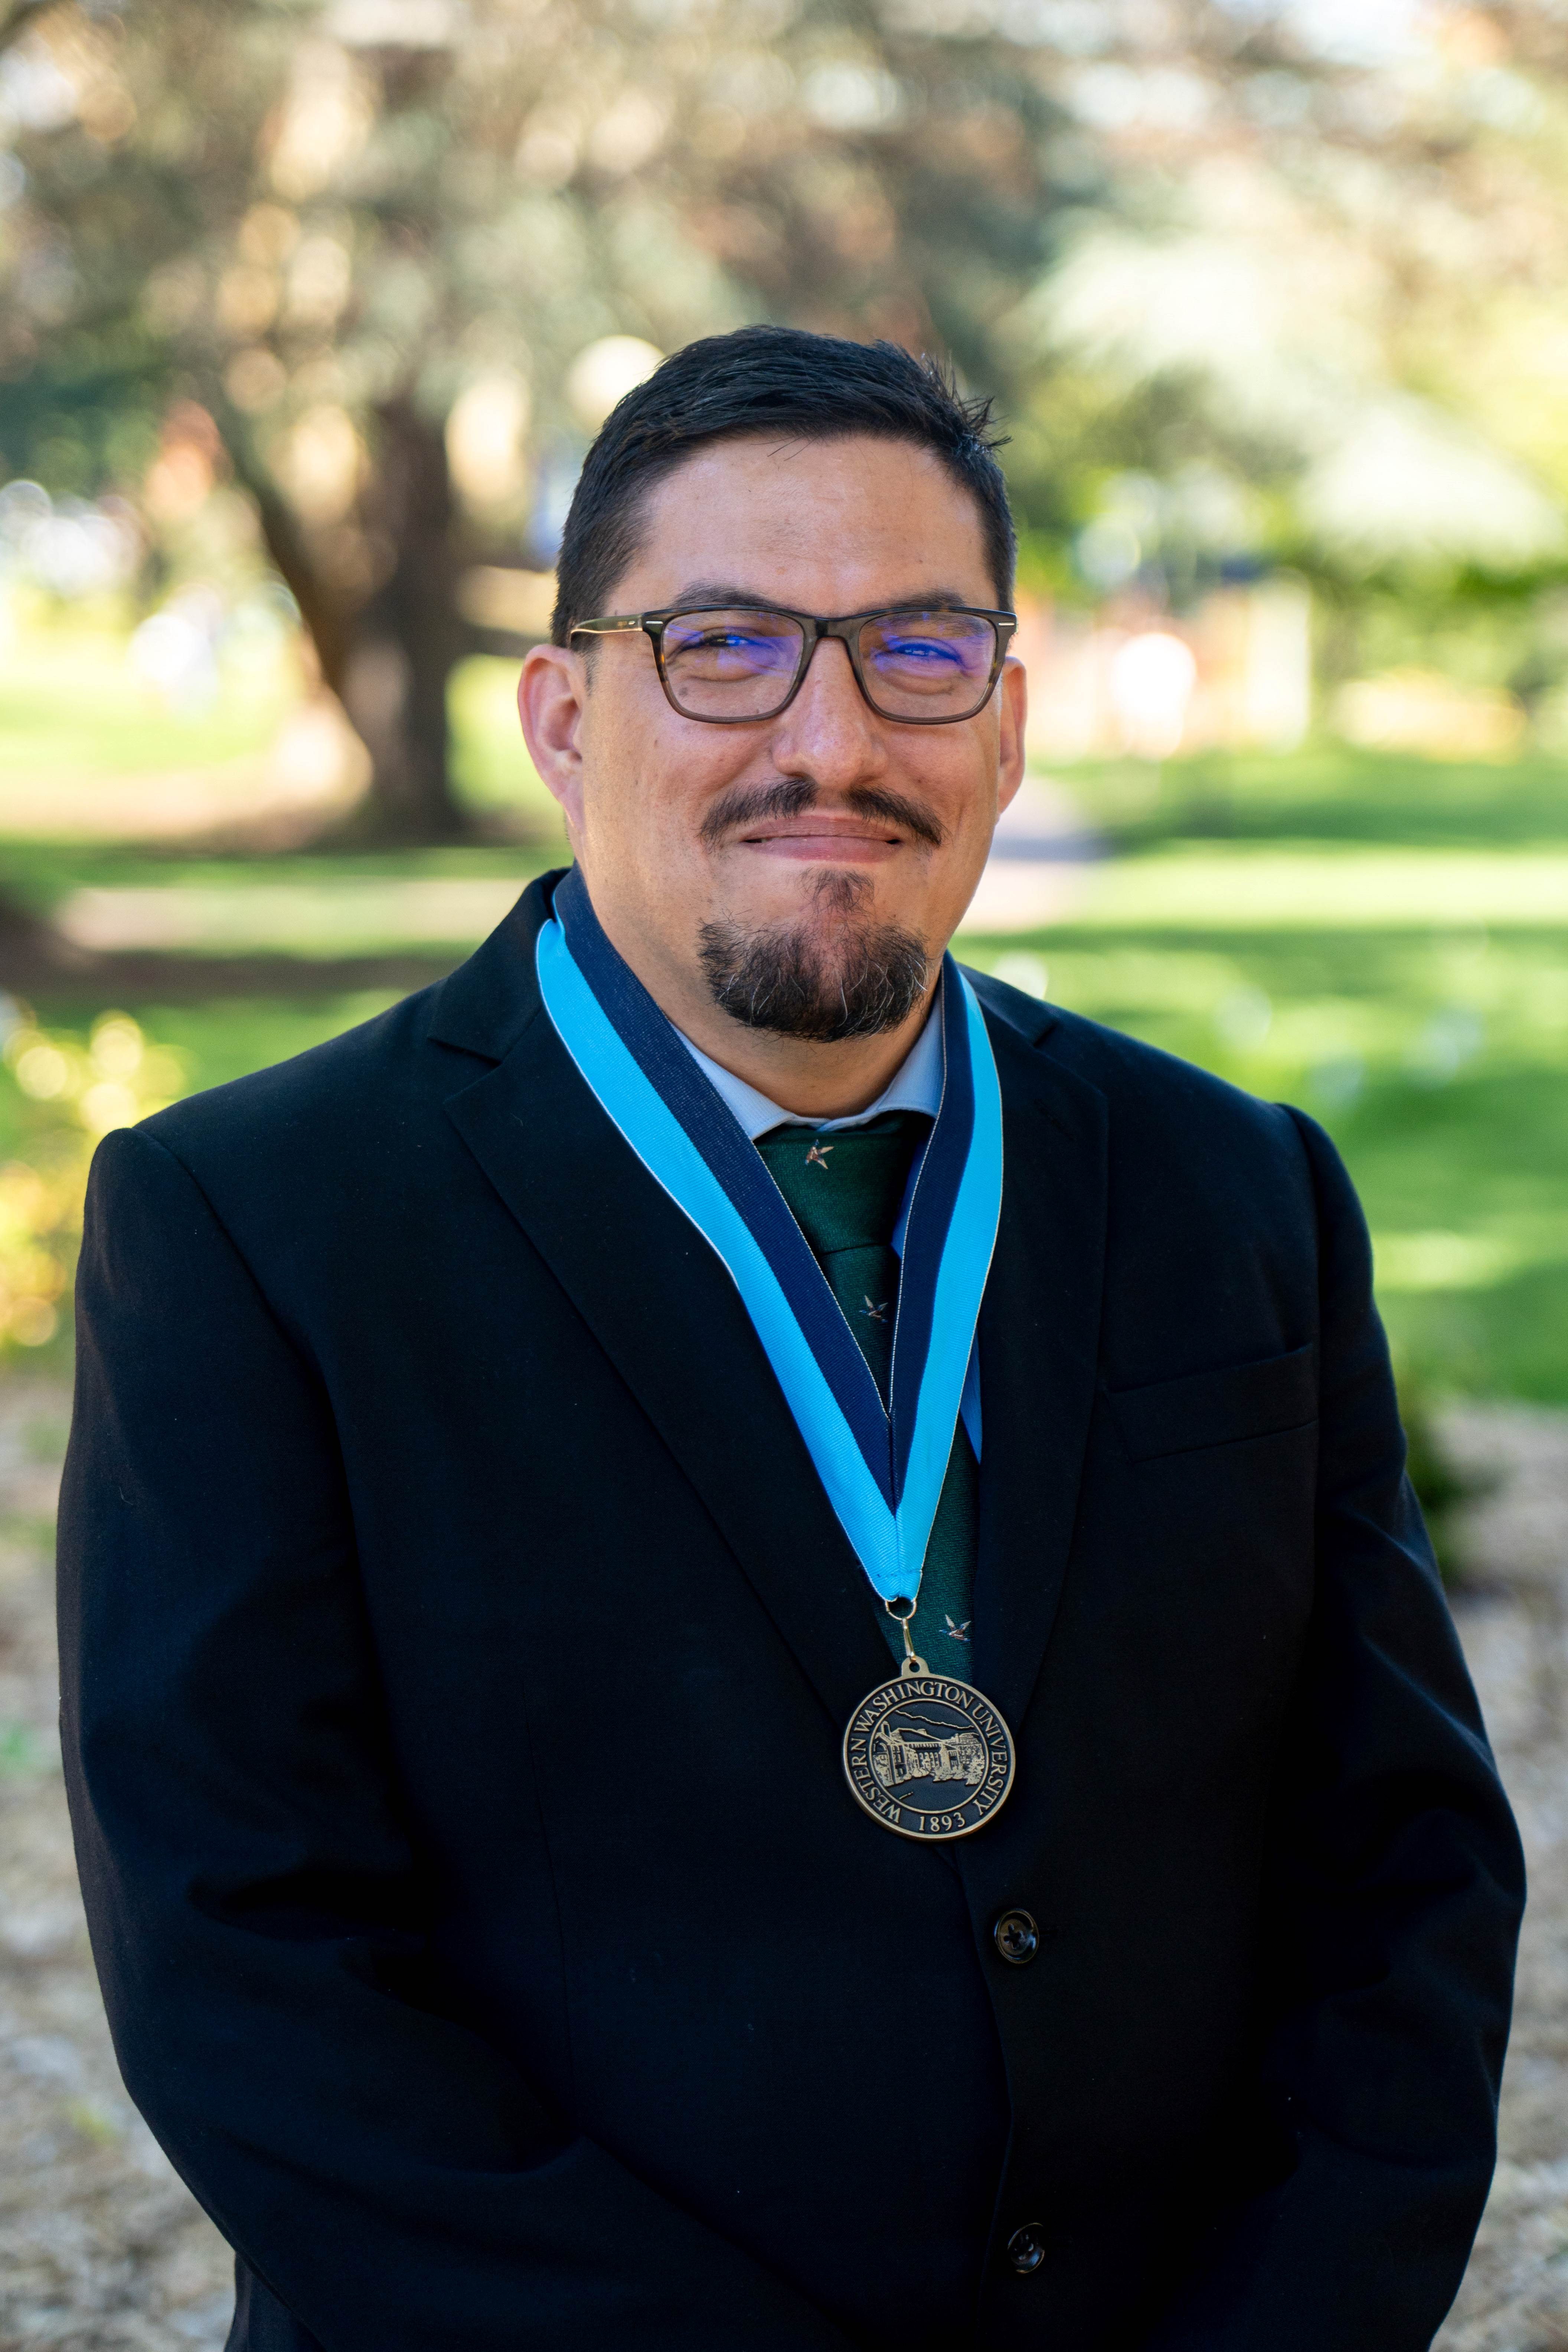 Manuel Montaño wears the Excellence in Teaching Award medal